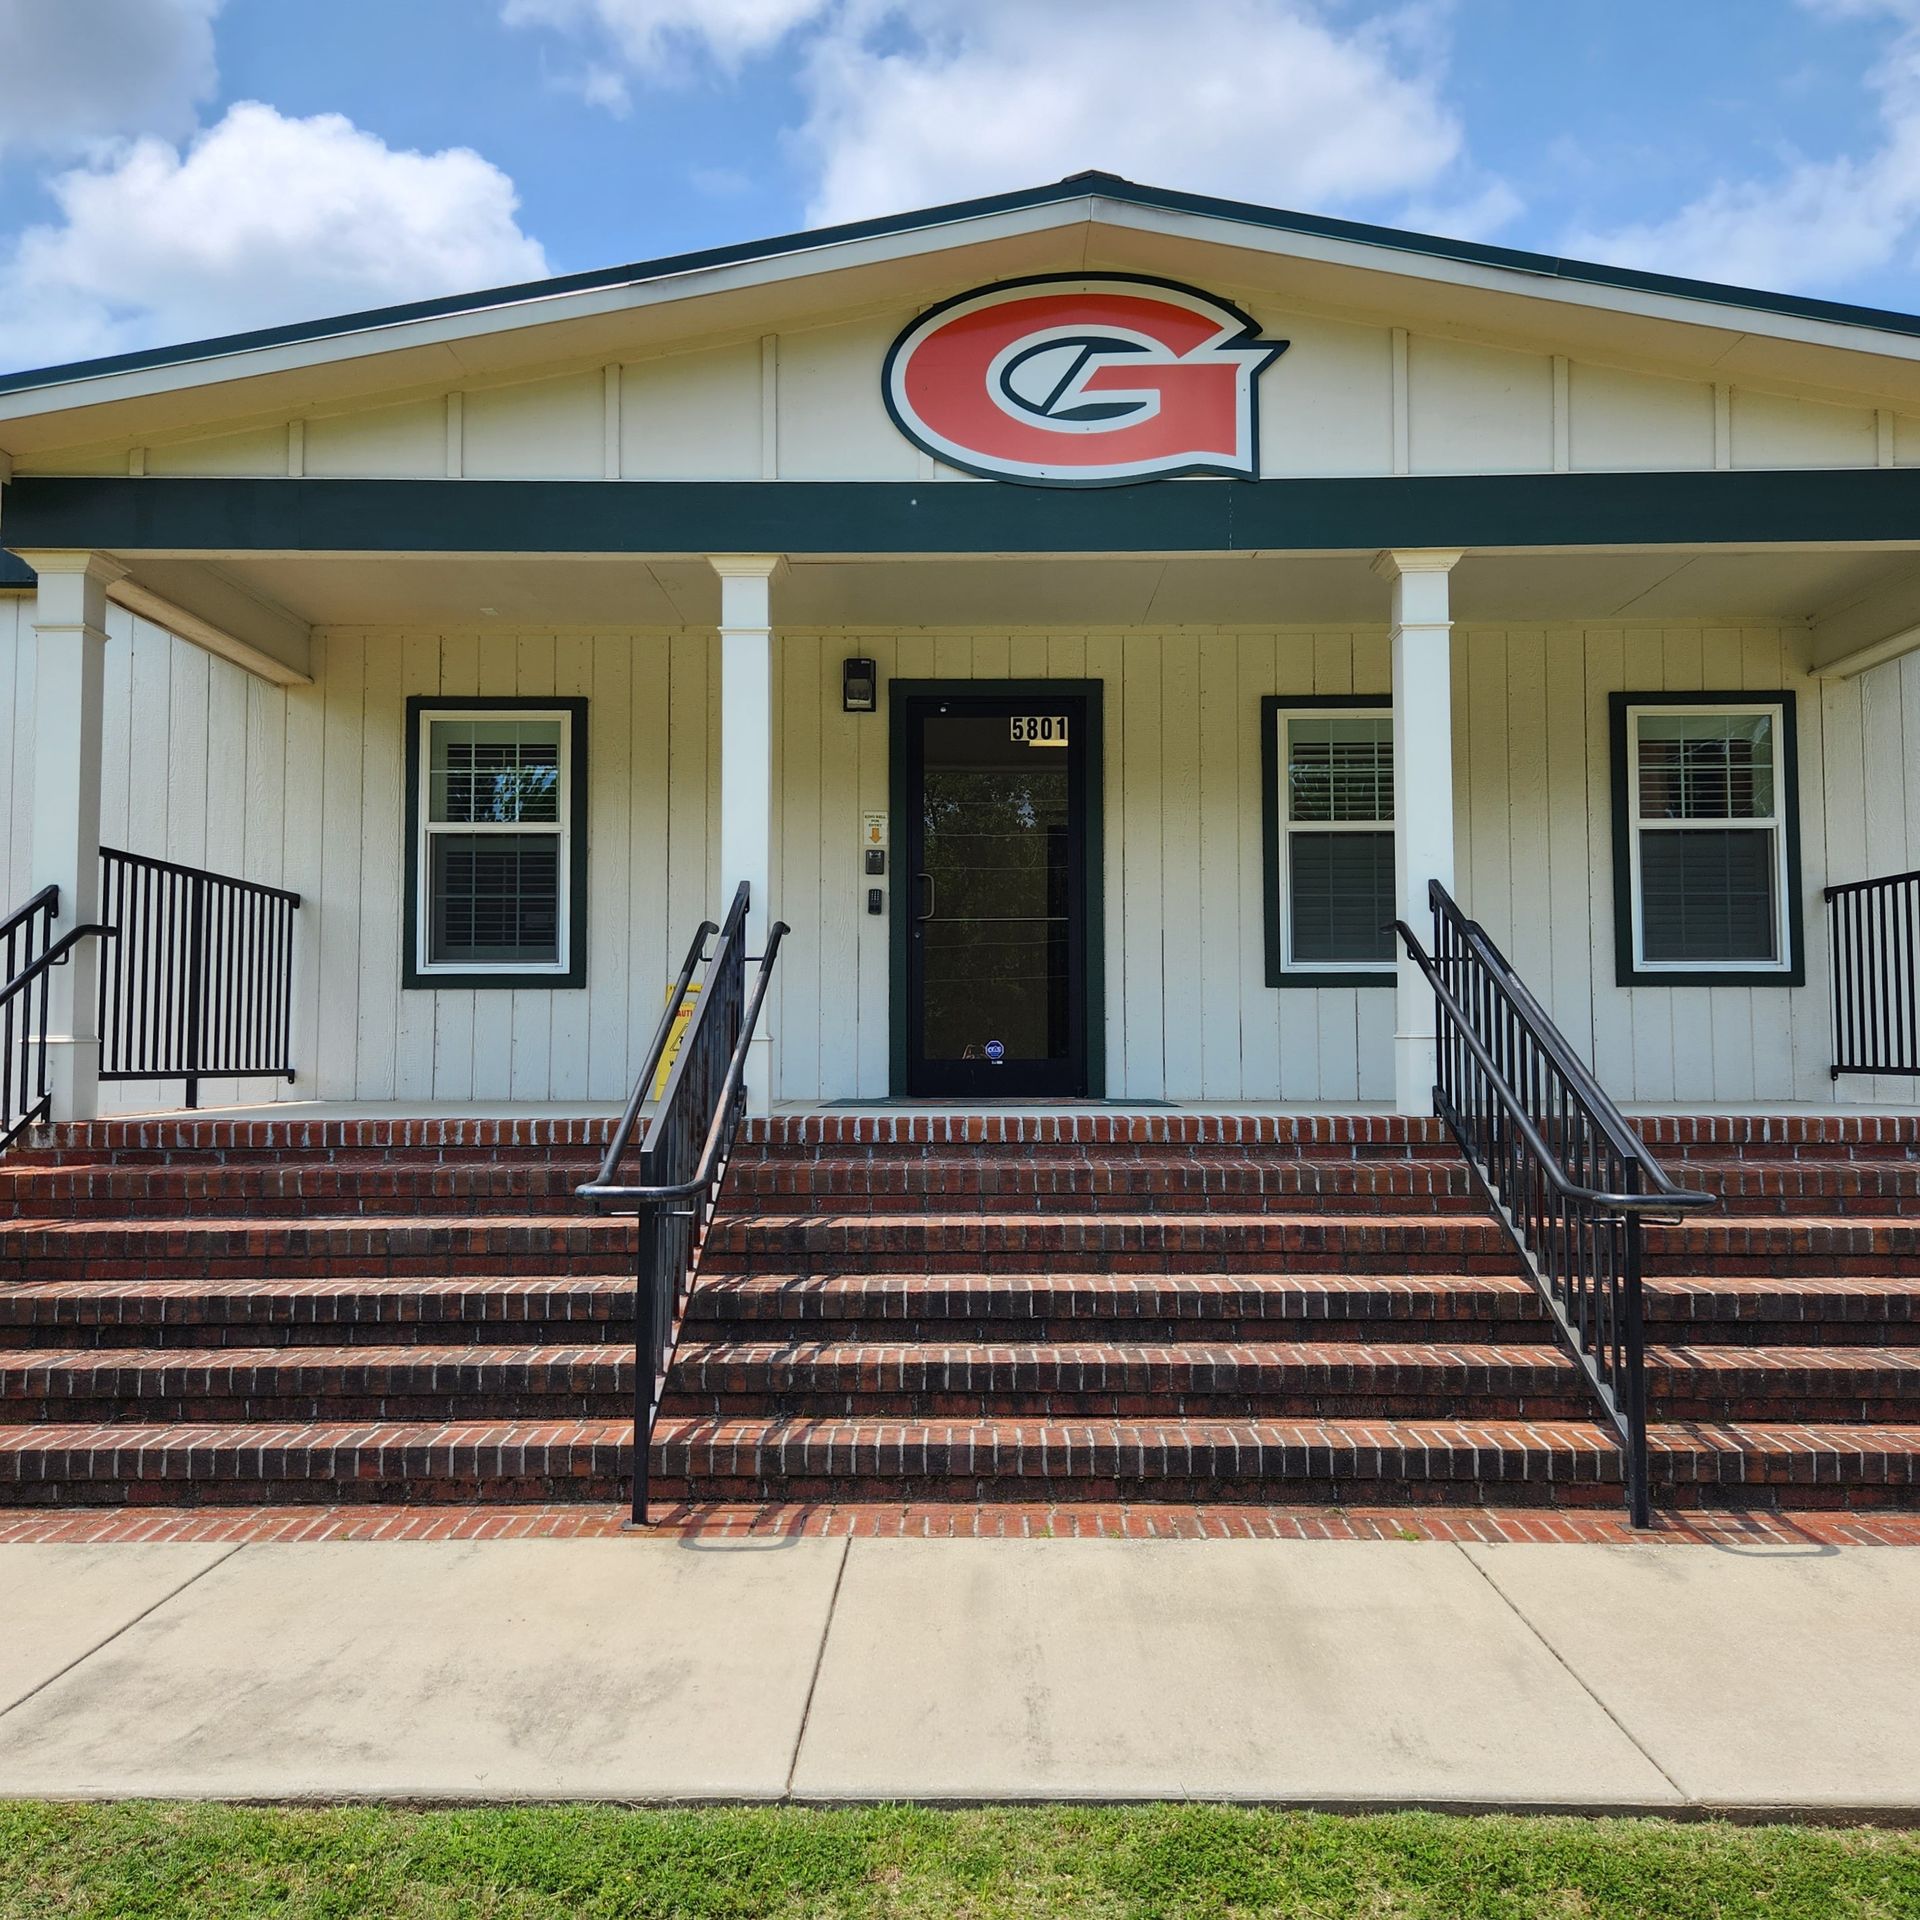 SPS window security Film installation services in AL - glass doors and windows were vulnerable entry points at this school near Auburn AL